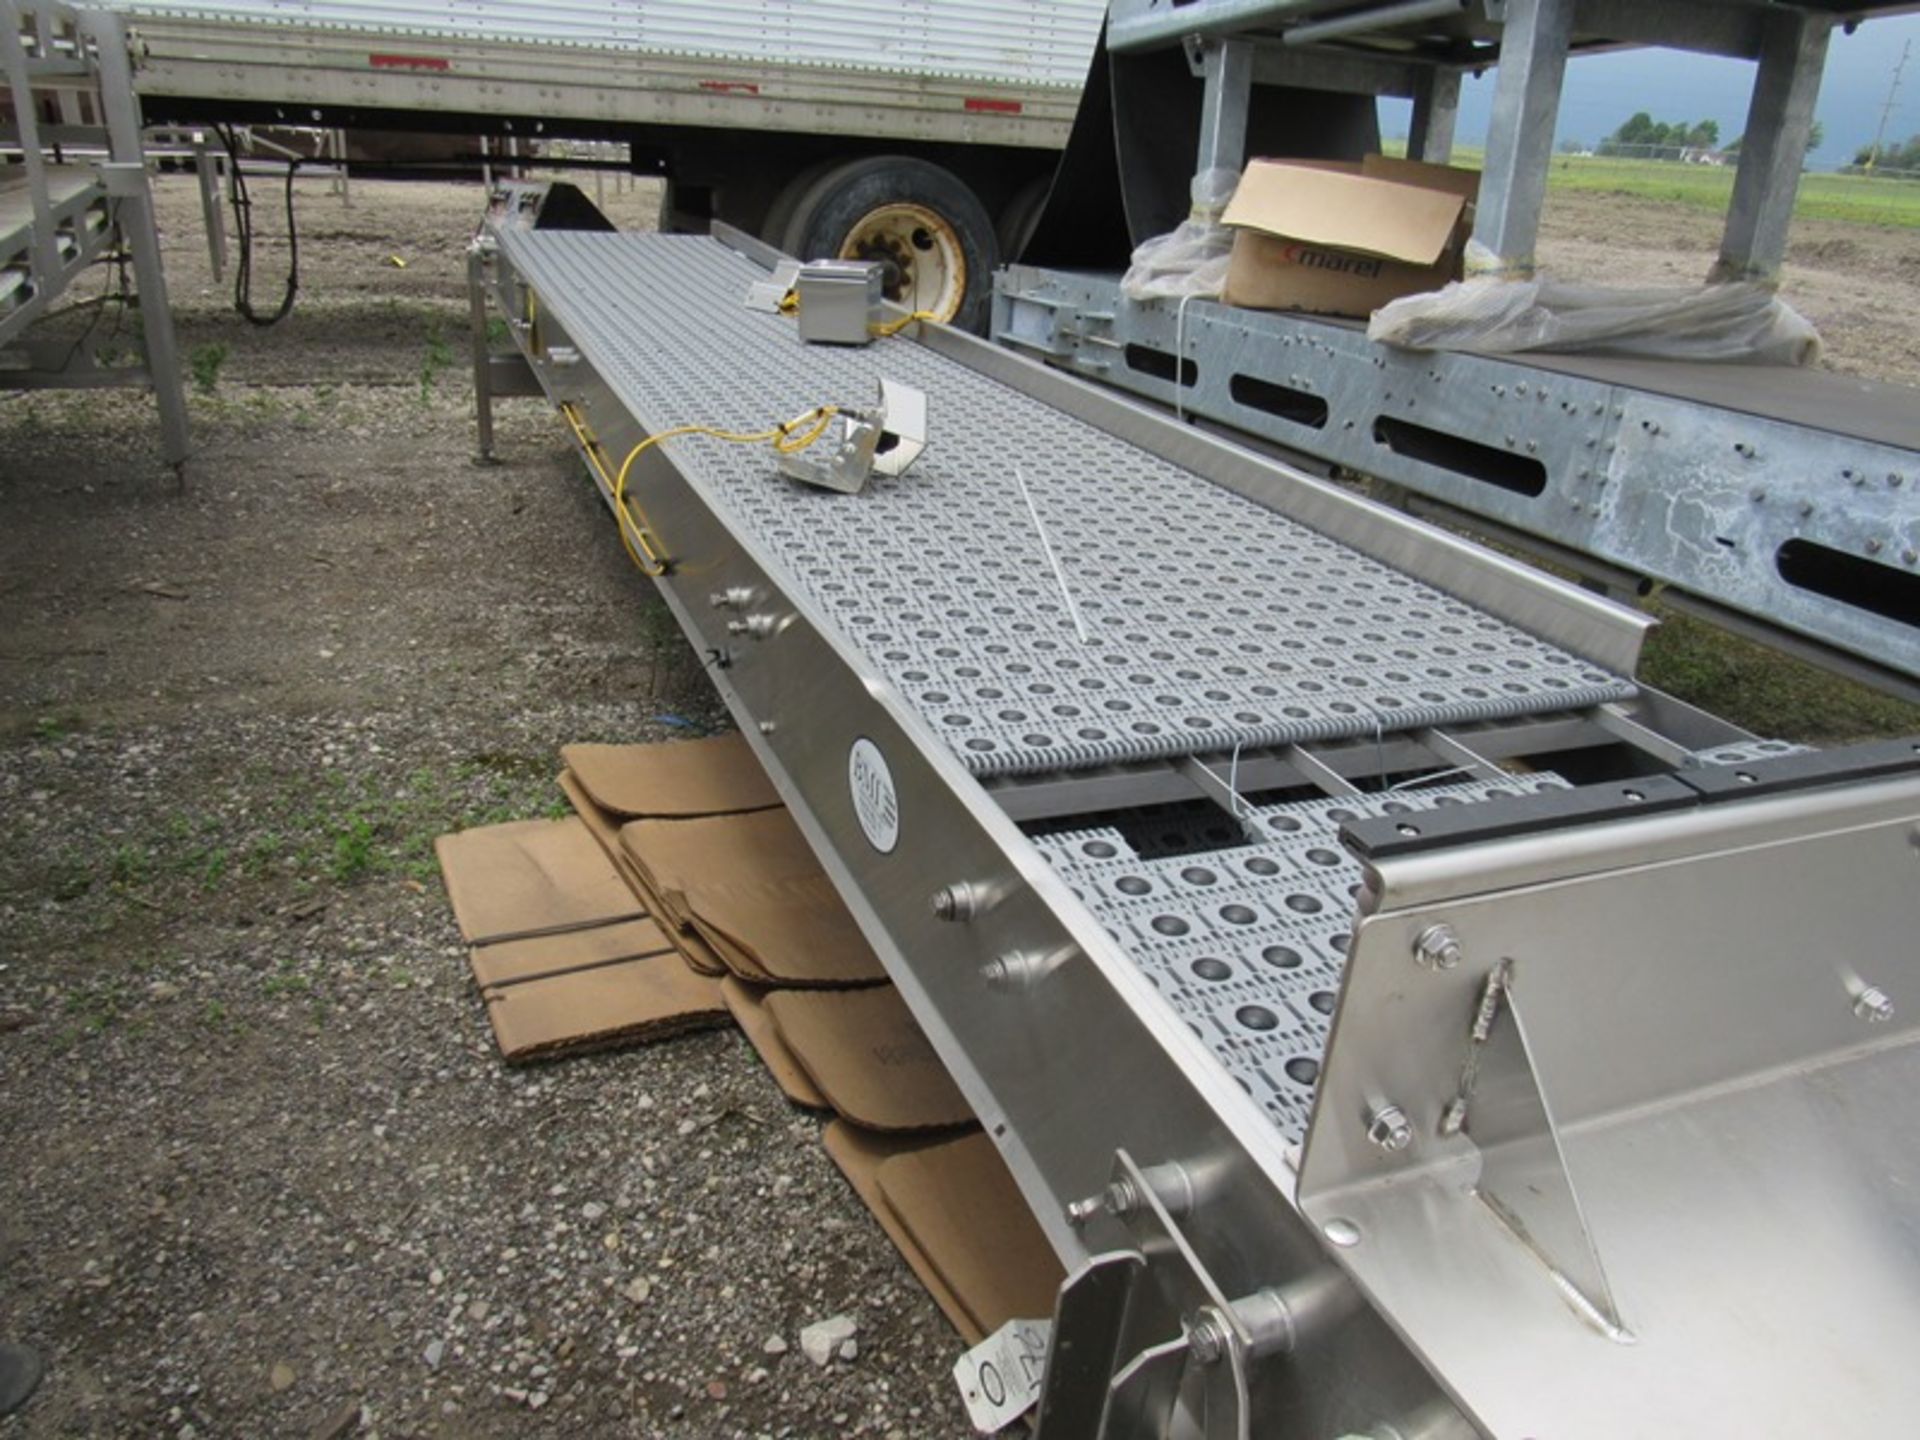 BMI Stainless Steel Conveyor, 30" W X 16' Long plastic belt (Loading Fee: $150.00 - Rigger: Norm - Image 2 of 4